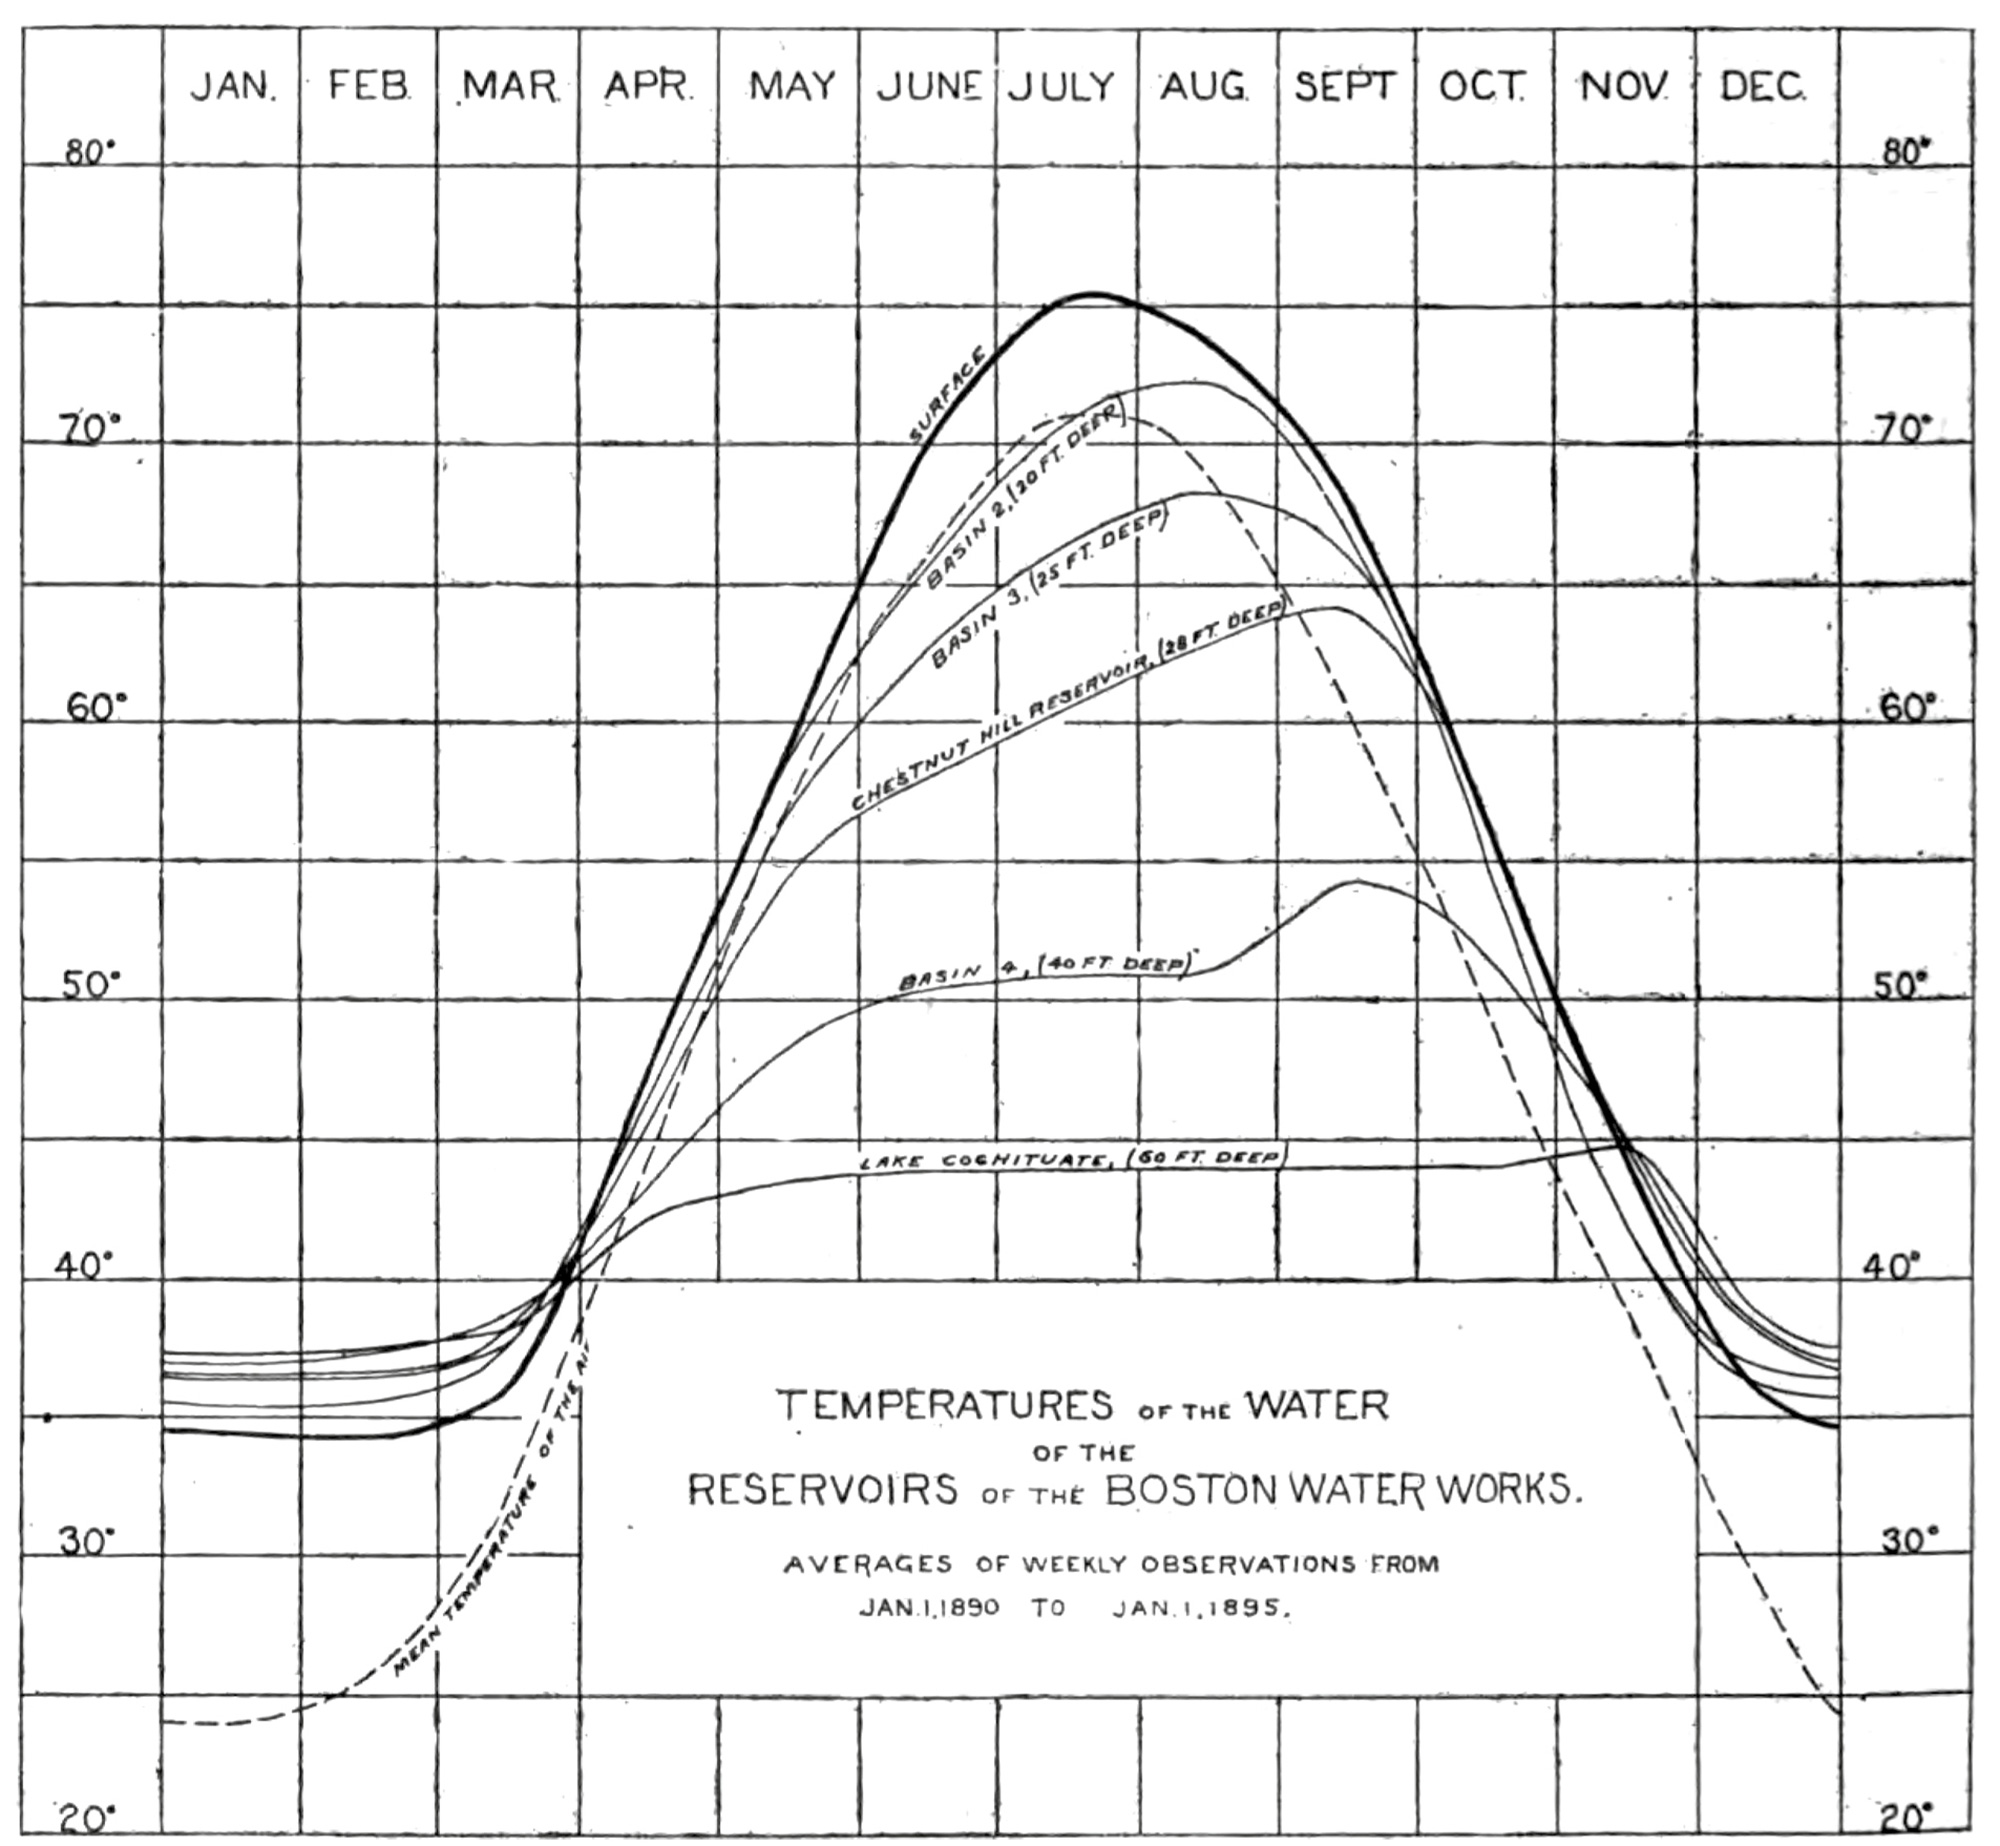 A graph representing results from George C. Whipple’s reservoir study using the thermophone. The X-axis tracks months of the year and the Y-axis tracks the water temperature of reservoirs at the Boston Water Works. 